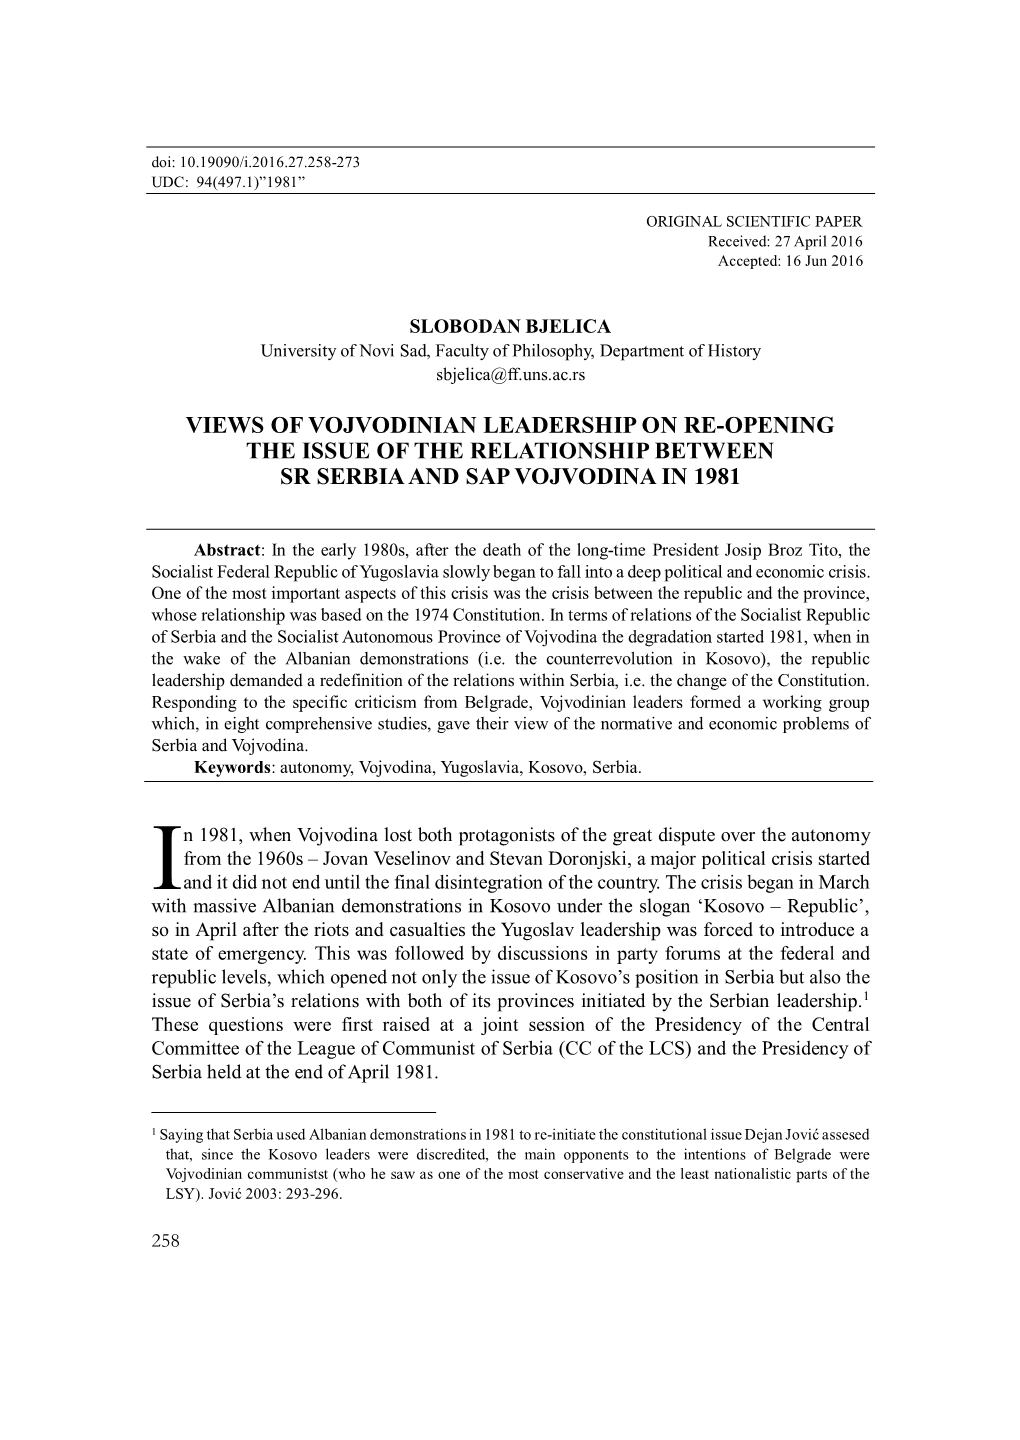 Views of Vojvodinian Leadership on Re-Opening the Issue of the Relationship Between Sr Serbia and Sap Vojvodina in 1981